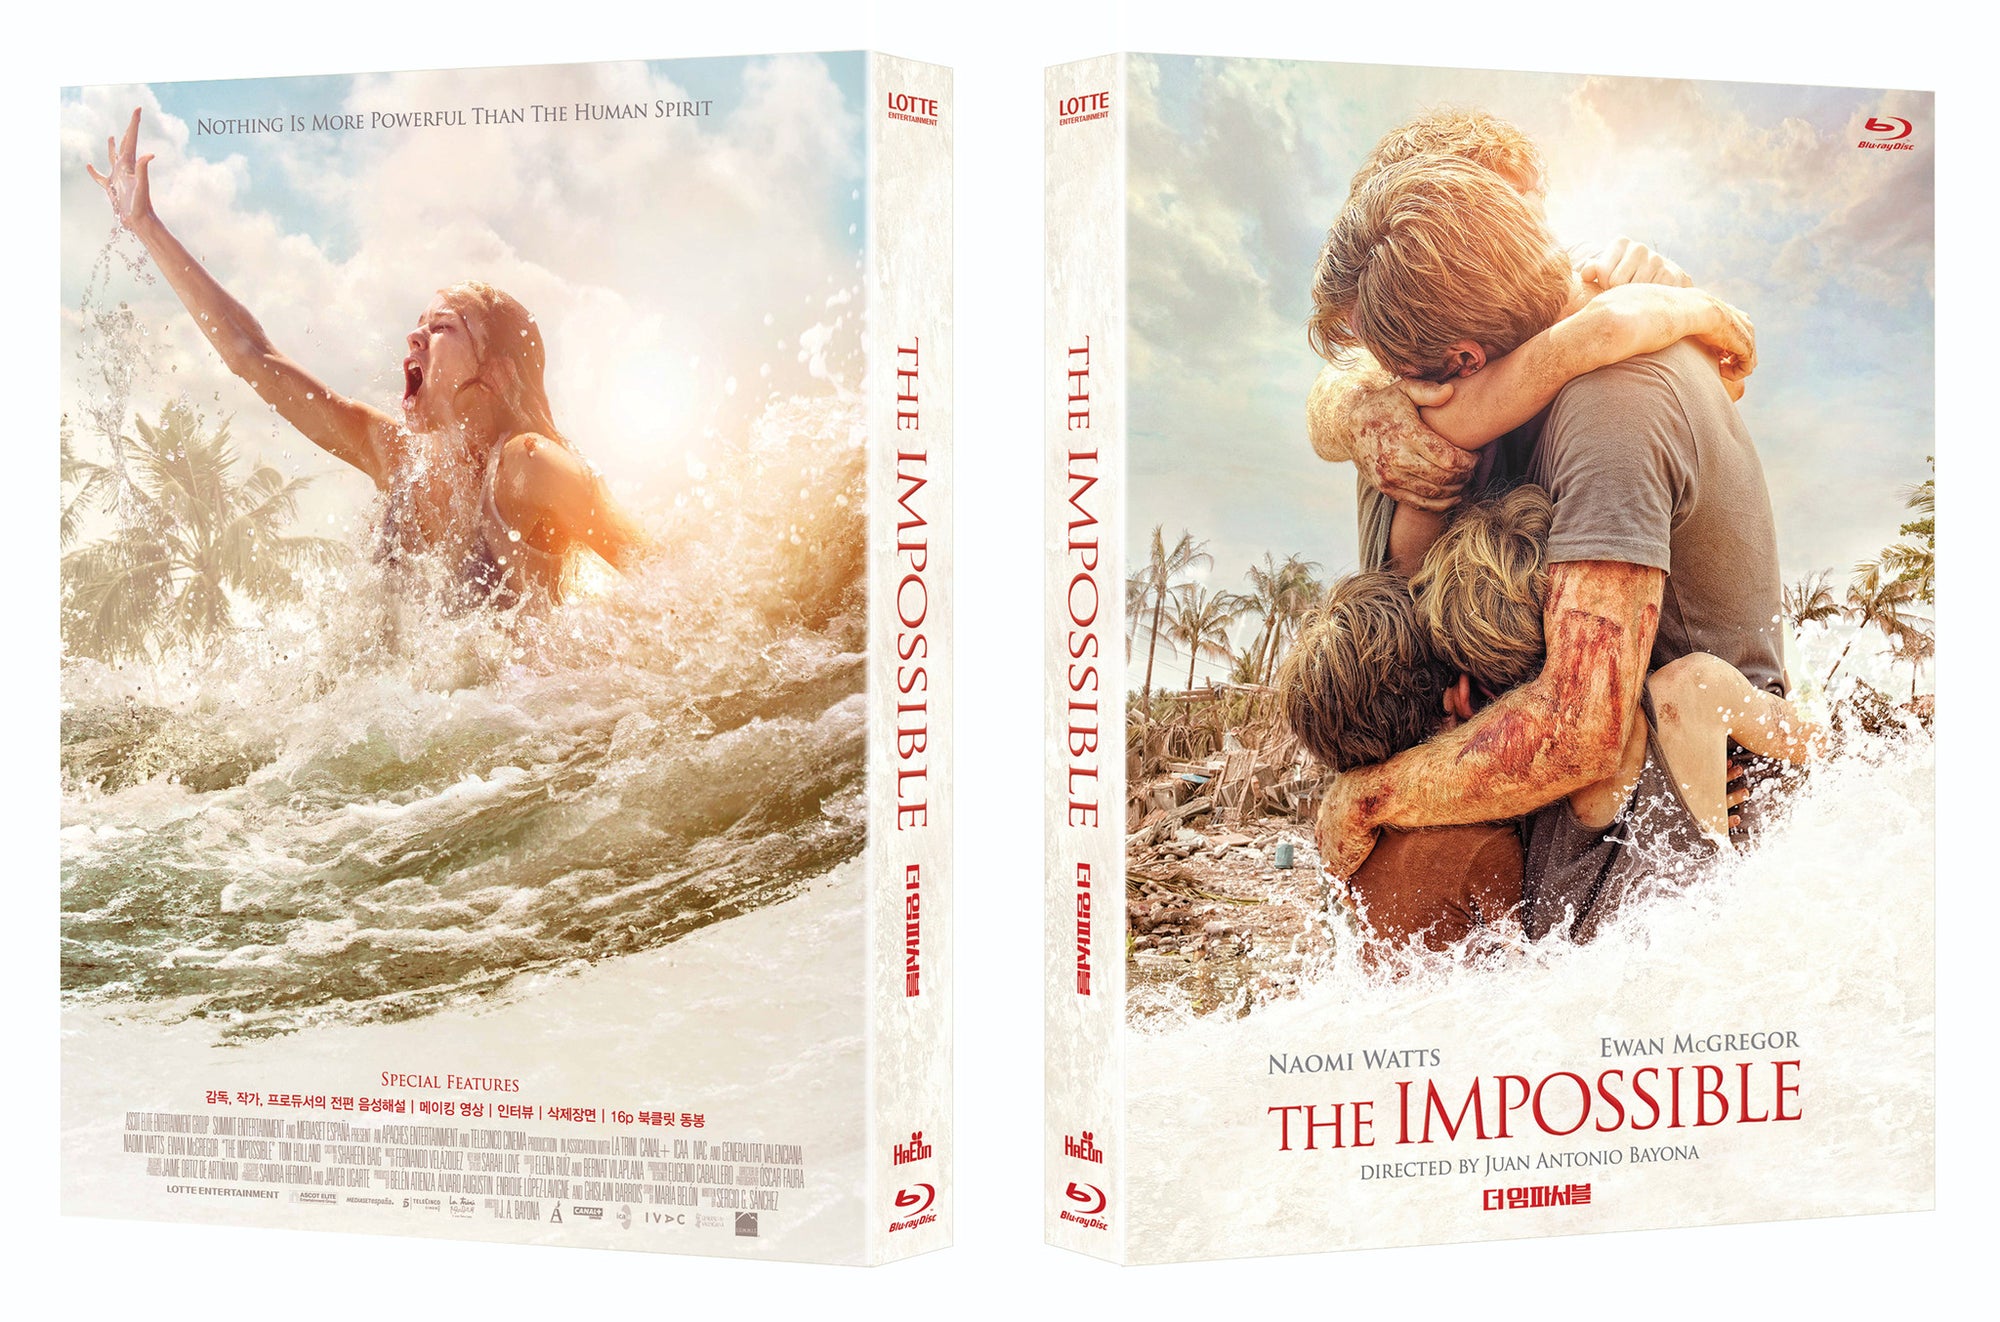 THE IMPOSSIBLE Blu-ray with full slip